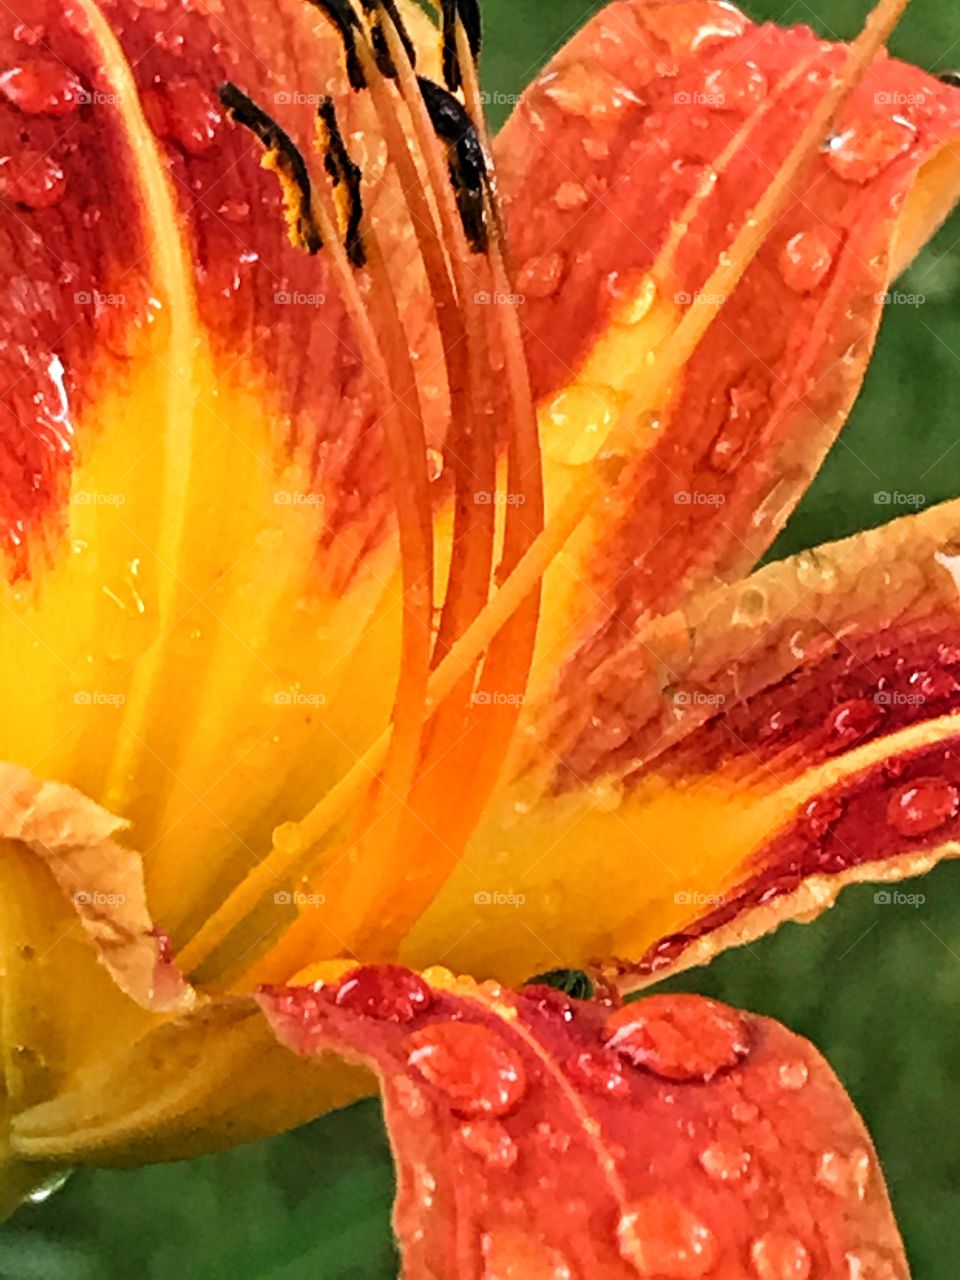 Raindrops on lily